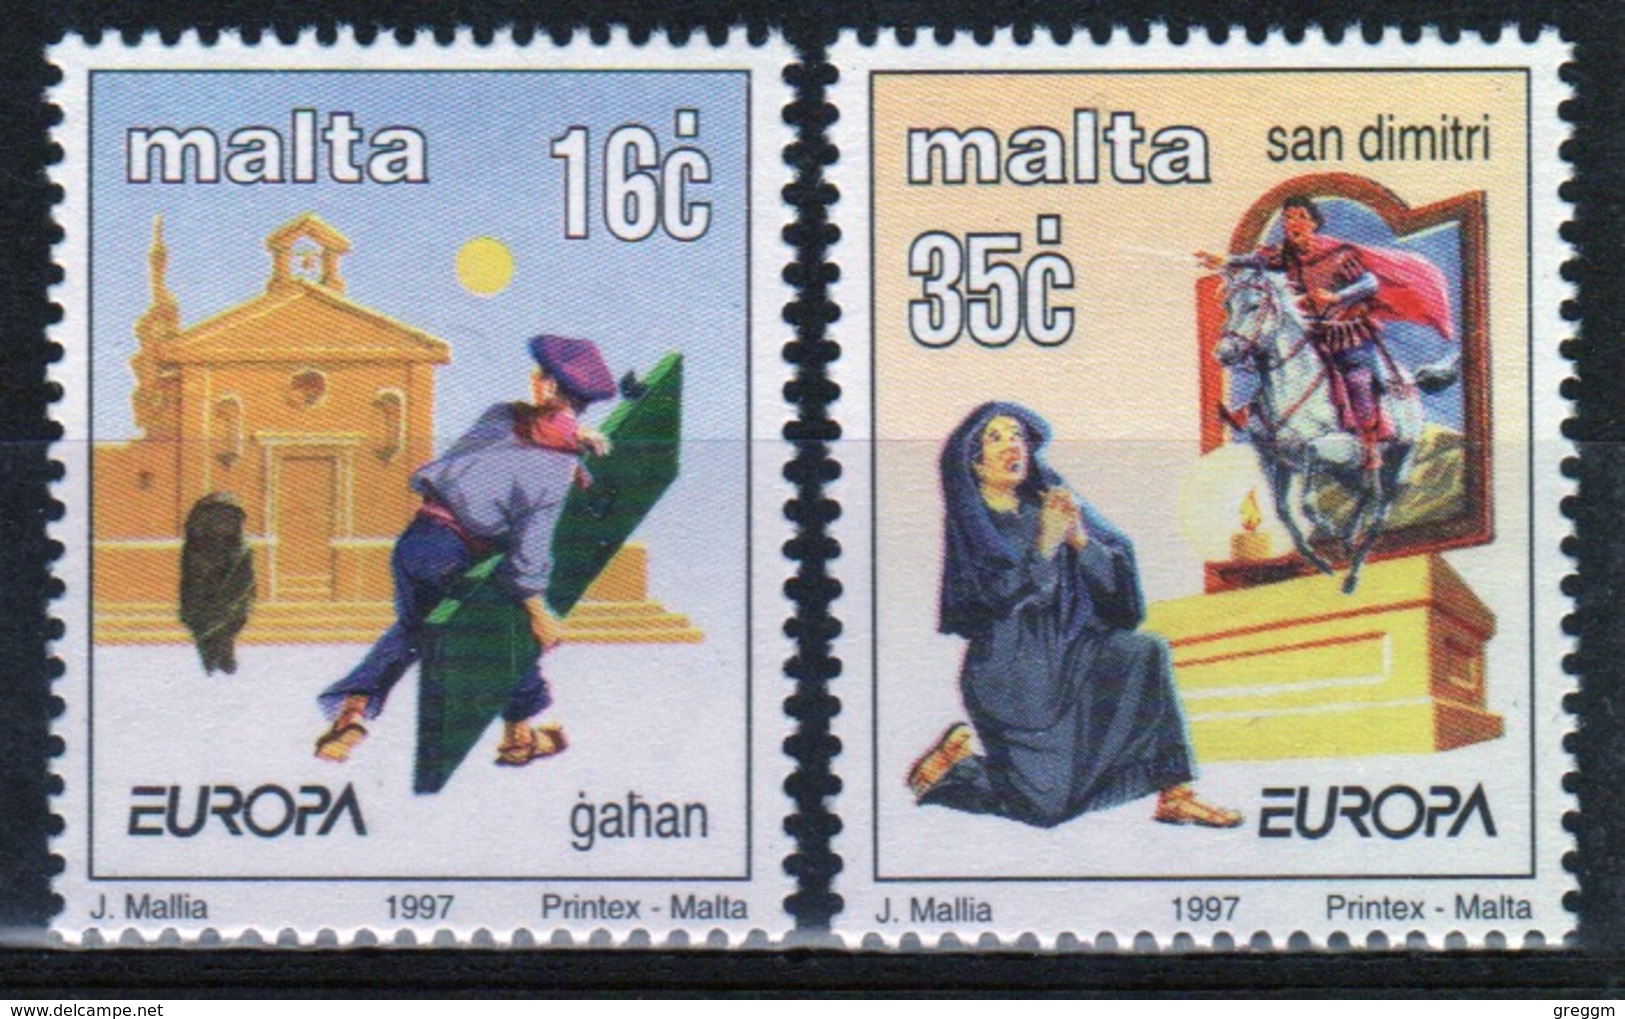 Malta 1997 Set Of Stamps To Celebrate Europa Tales And Legends. - Malta